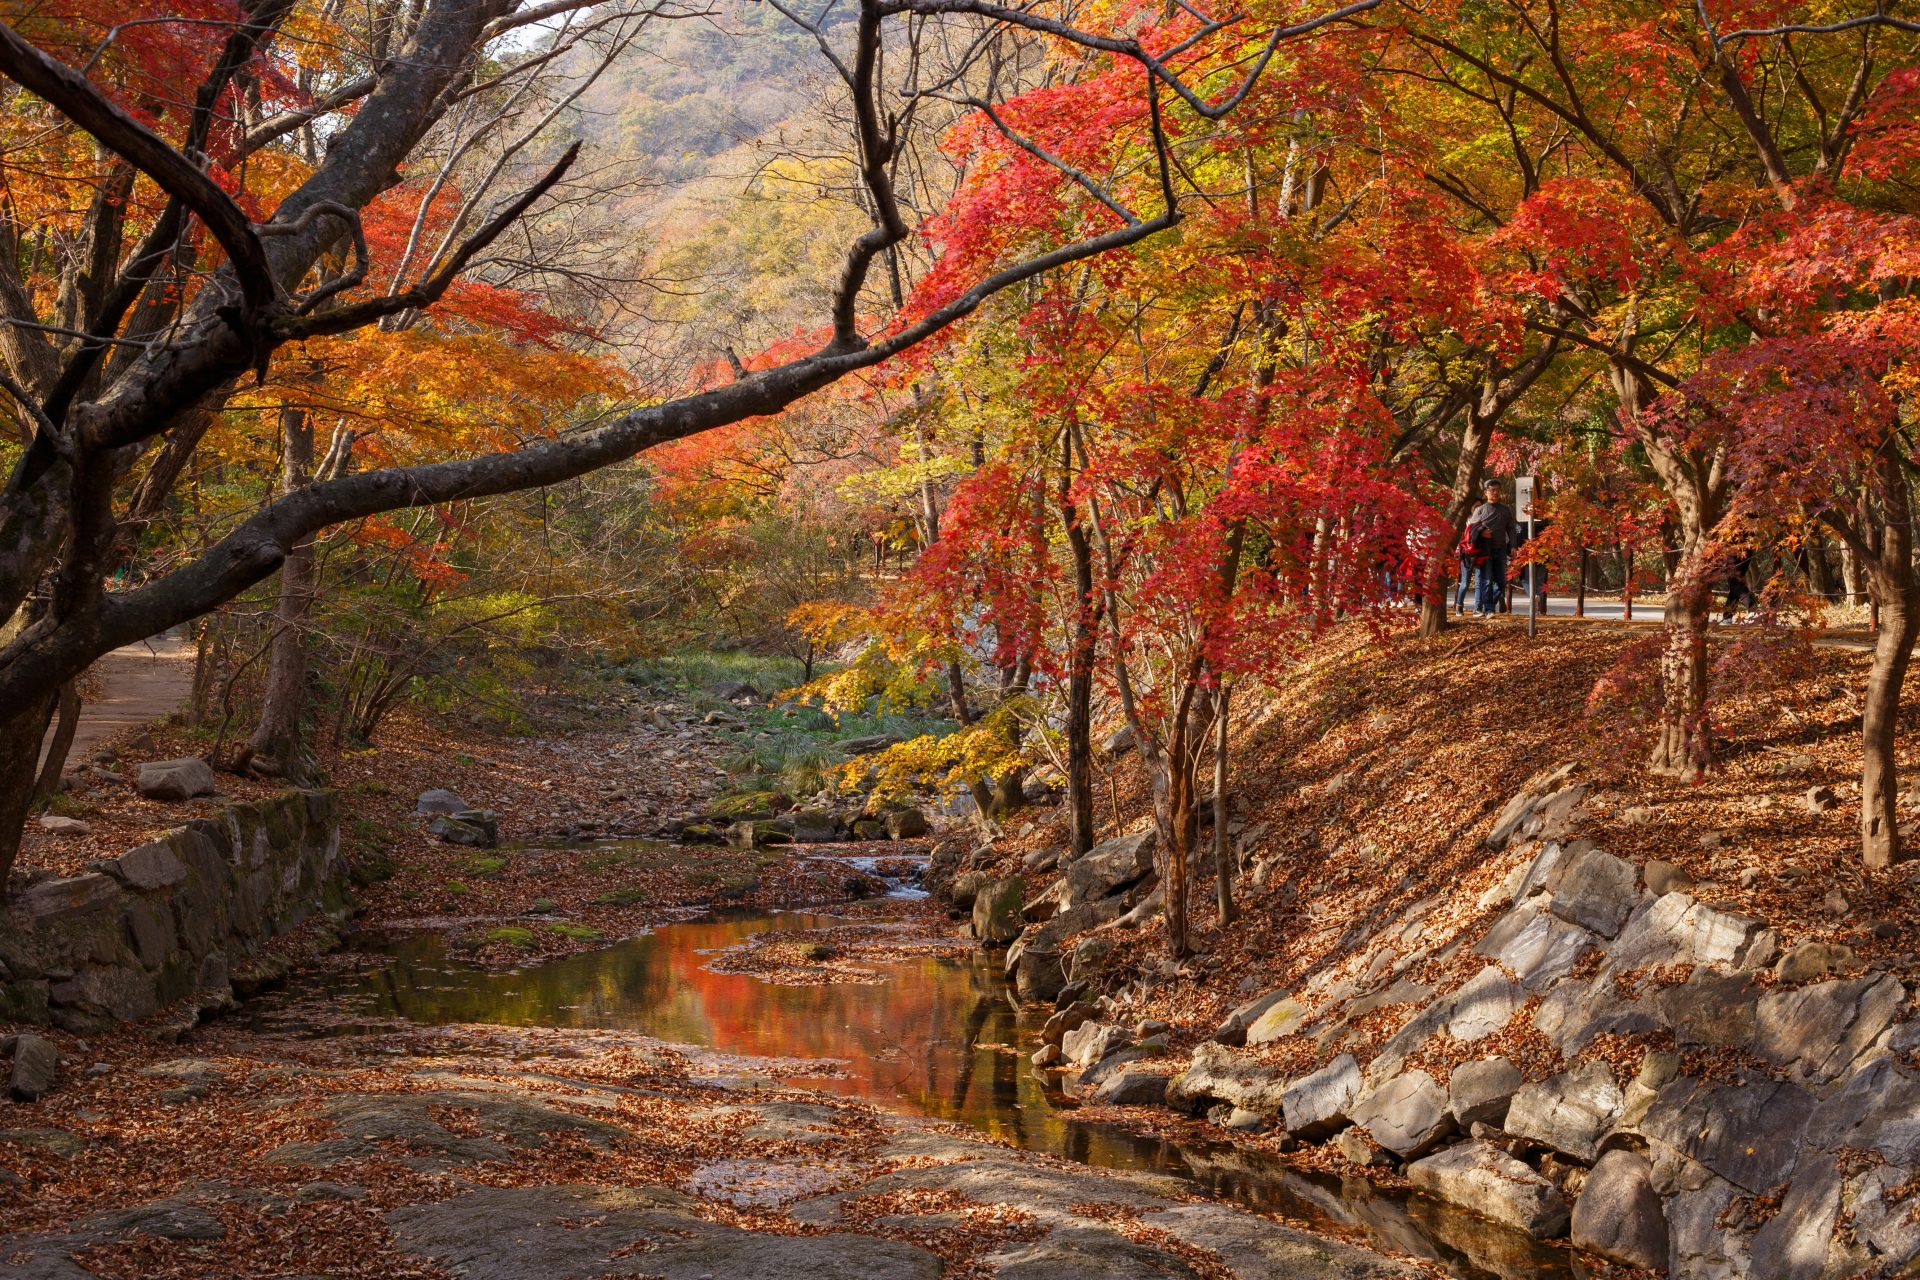 <p>Mt. Ura is famous for its autumn leaves, where the entire mountain is dyed red. The area is dotted with waterfalls and temples, so we recommend trekking to see the autumn leaves.</p> <p>Image: Ken Cheung / Unsplash</p>